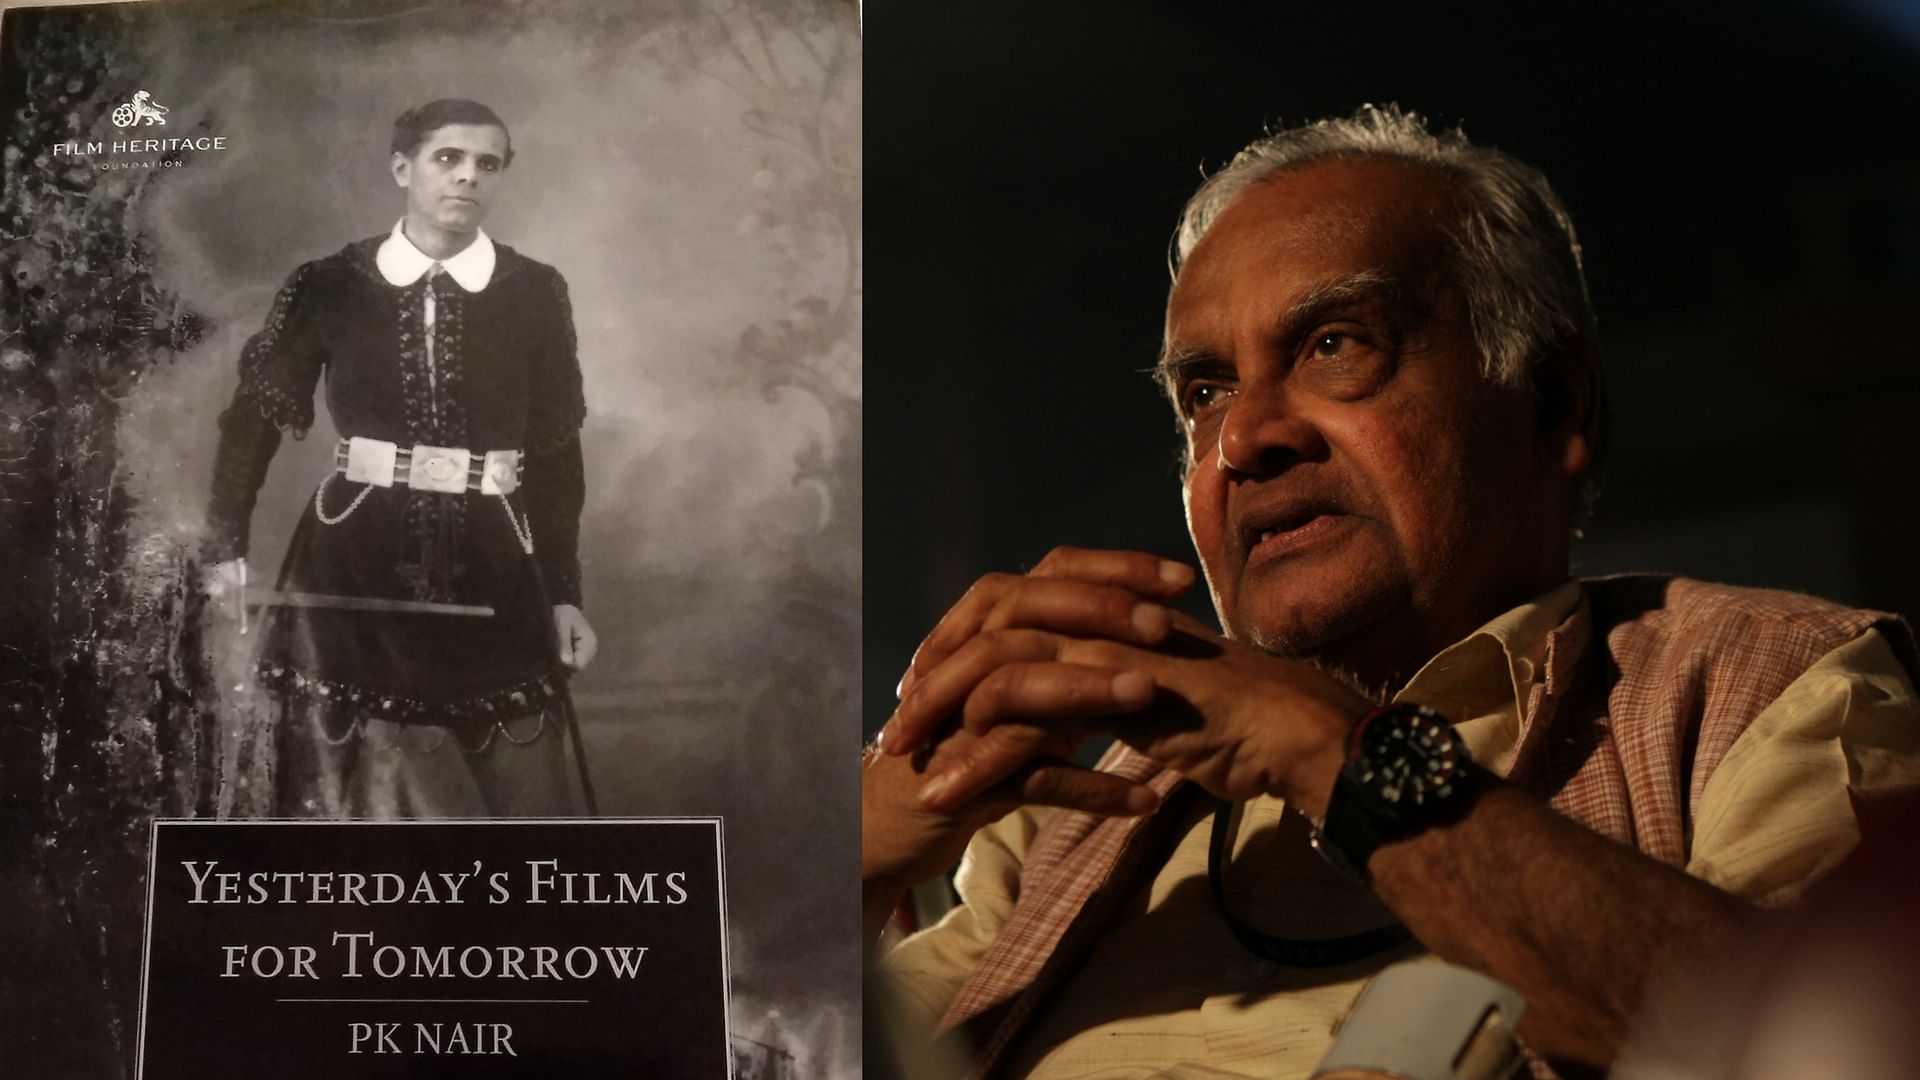 

PK Nair’s writings have been compiled into <i>Yesterday’s Films For Tomorrow</i>. (Photo courtesy: <a href="https://www.facebook.com/pg/filmheritagefoundation/photos/?ref=page_internal">Facebook/ Filmheritagefoundation/ vishwagujarat</a>)